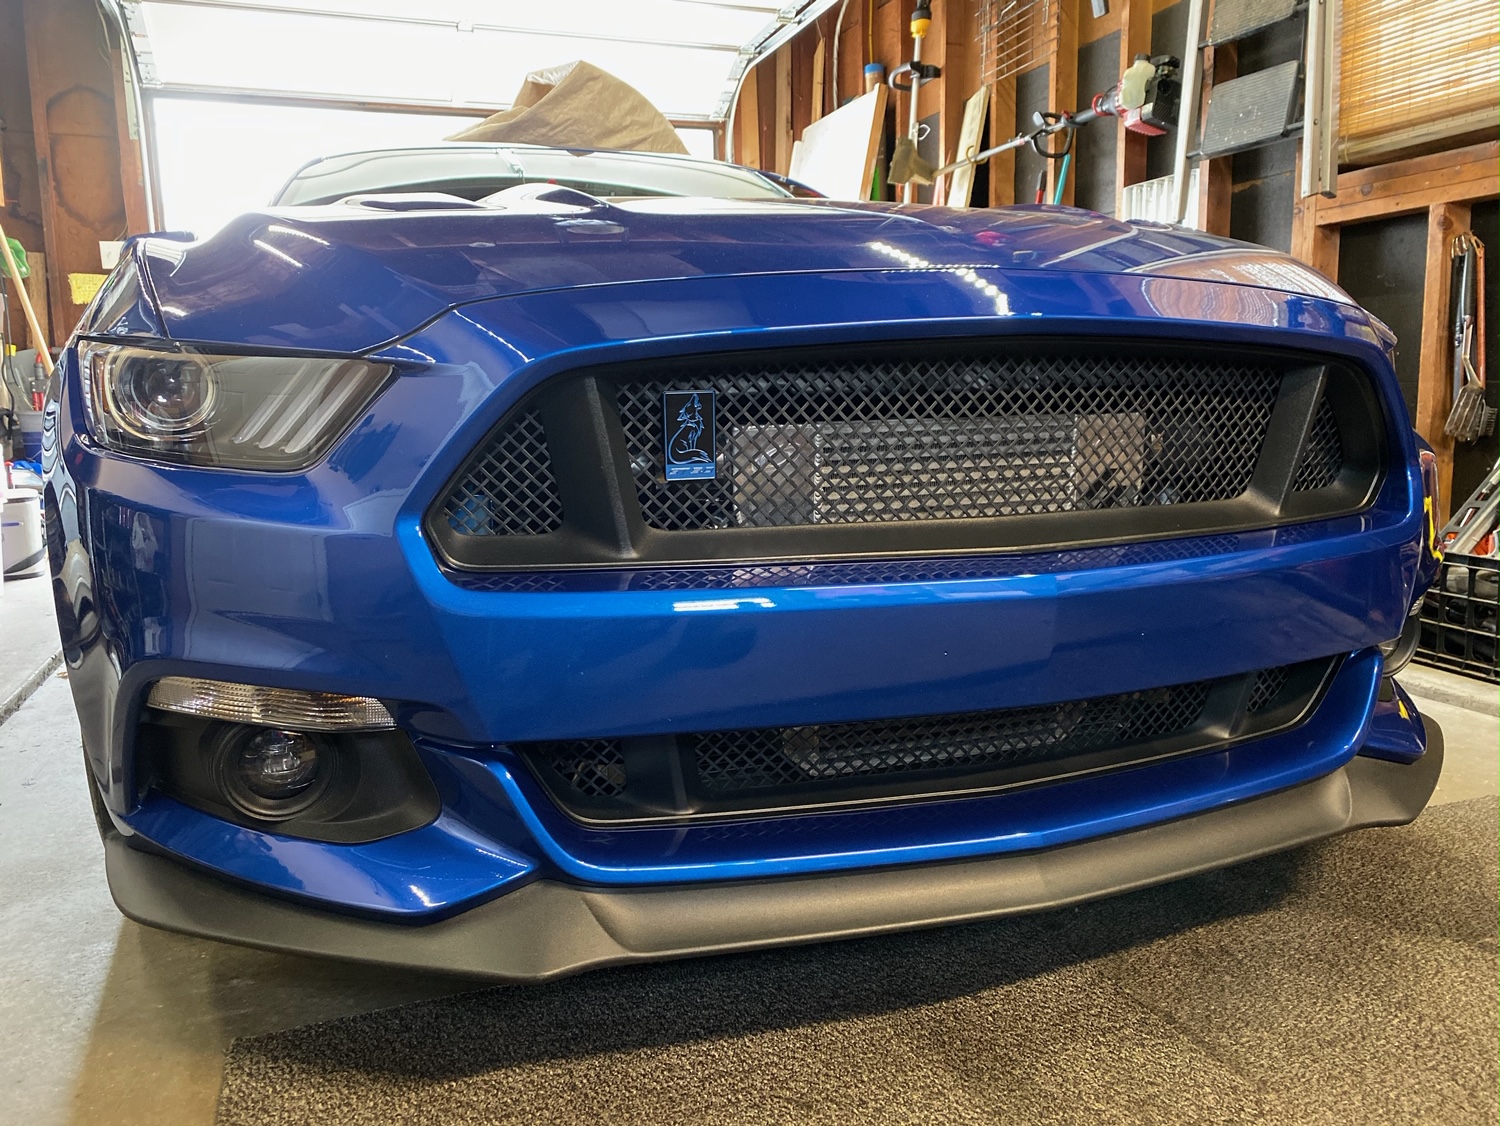 Woven Mesh Grill Kit for 2015 - 2017 Ford Mustang GT #5